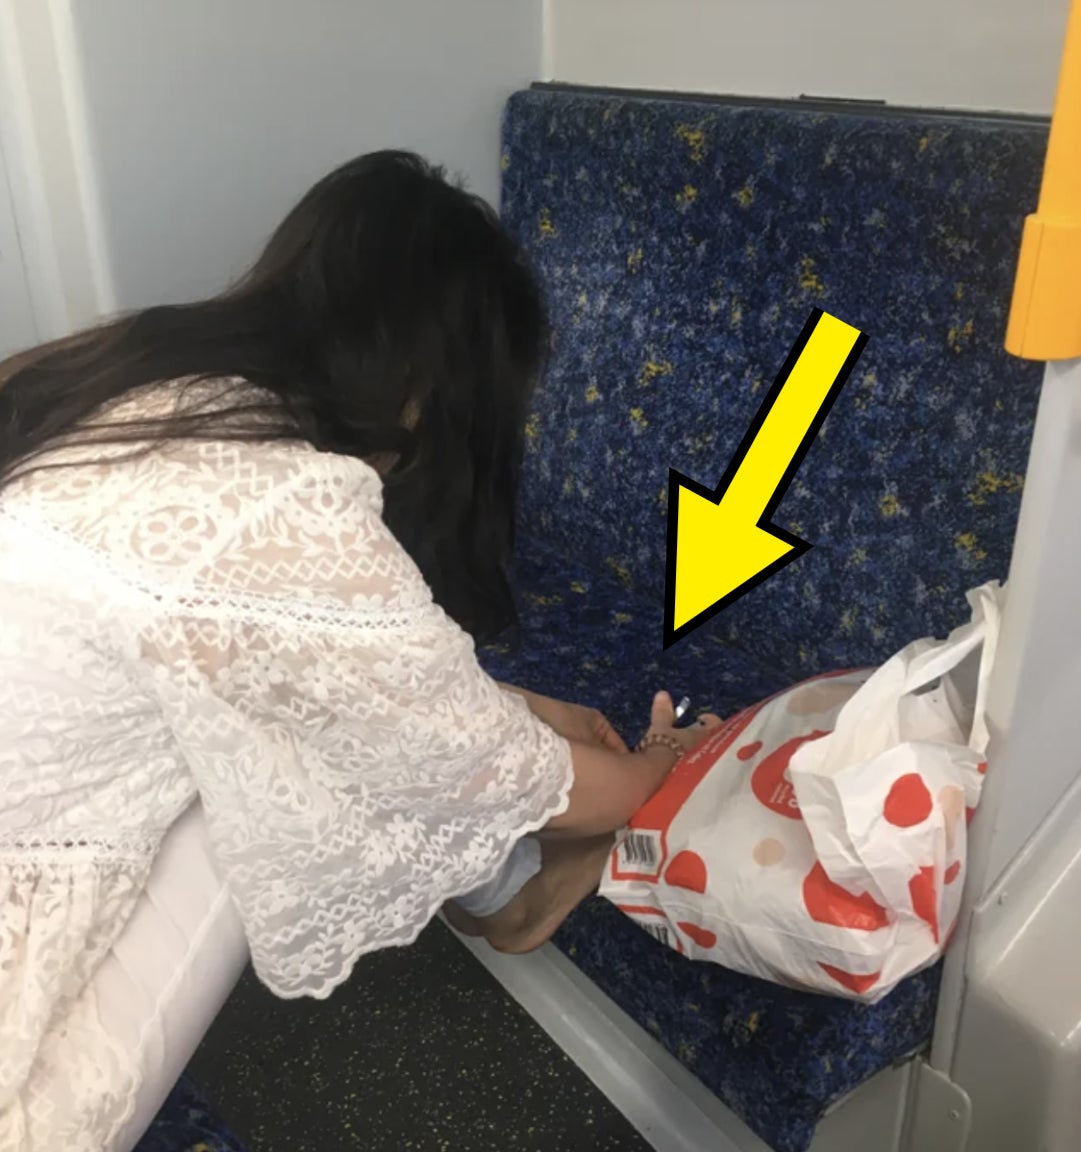 A woman is cutting her toes on the train